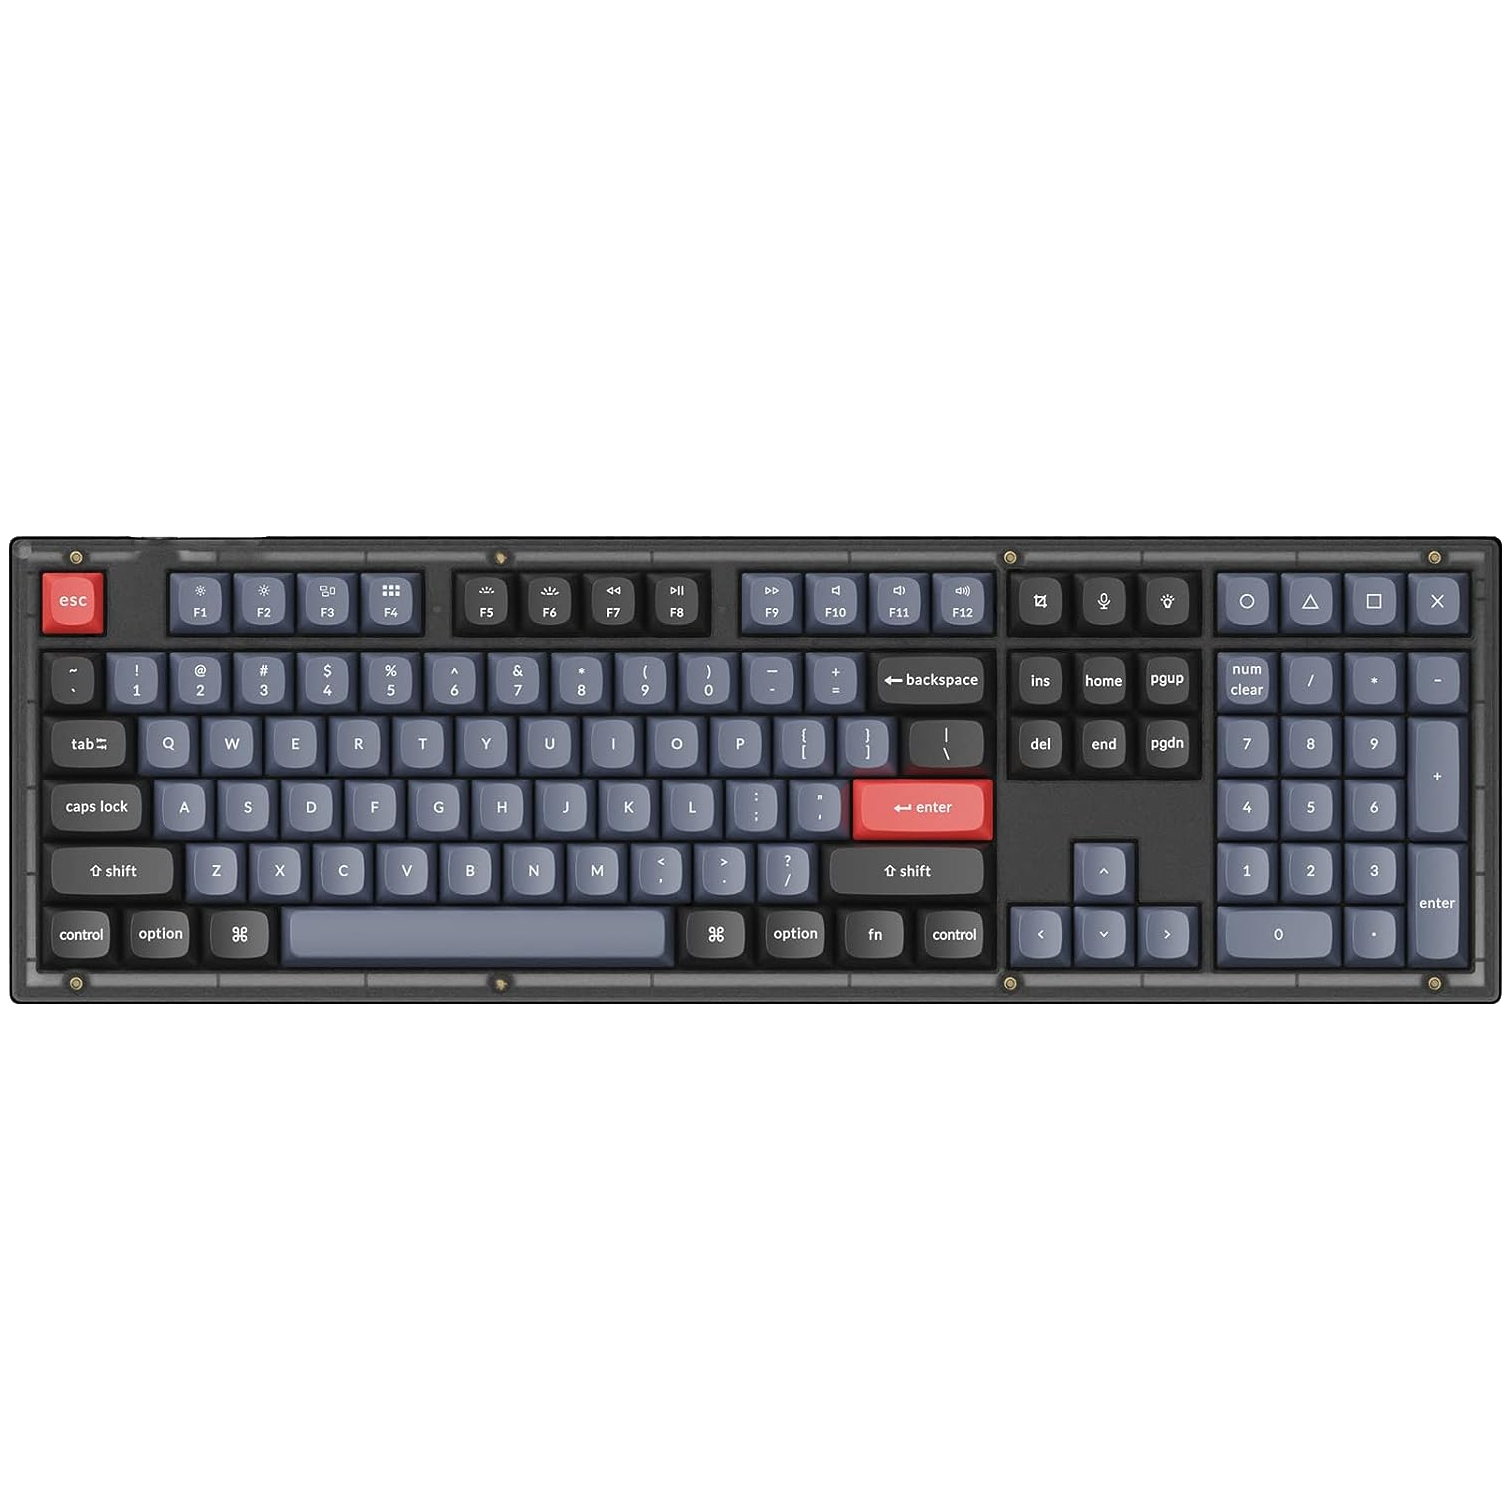 keychron mechanical keyboard with a full size layout